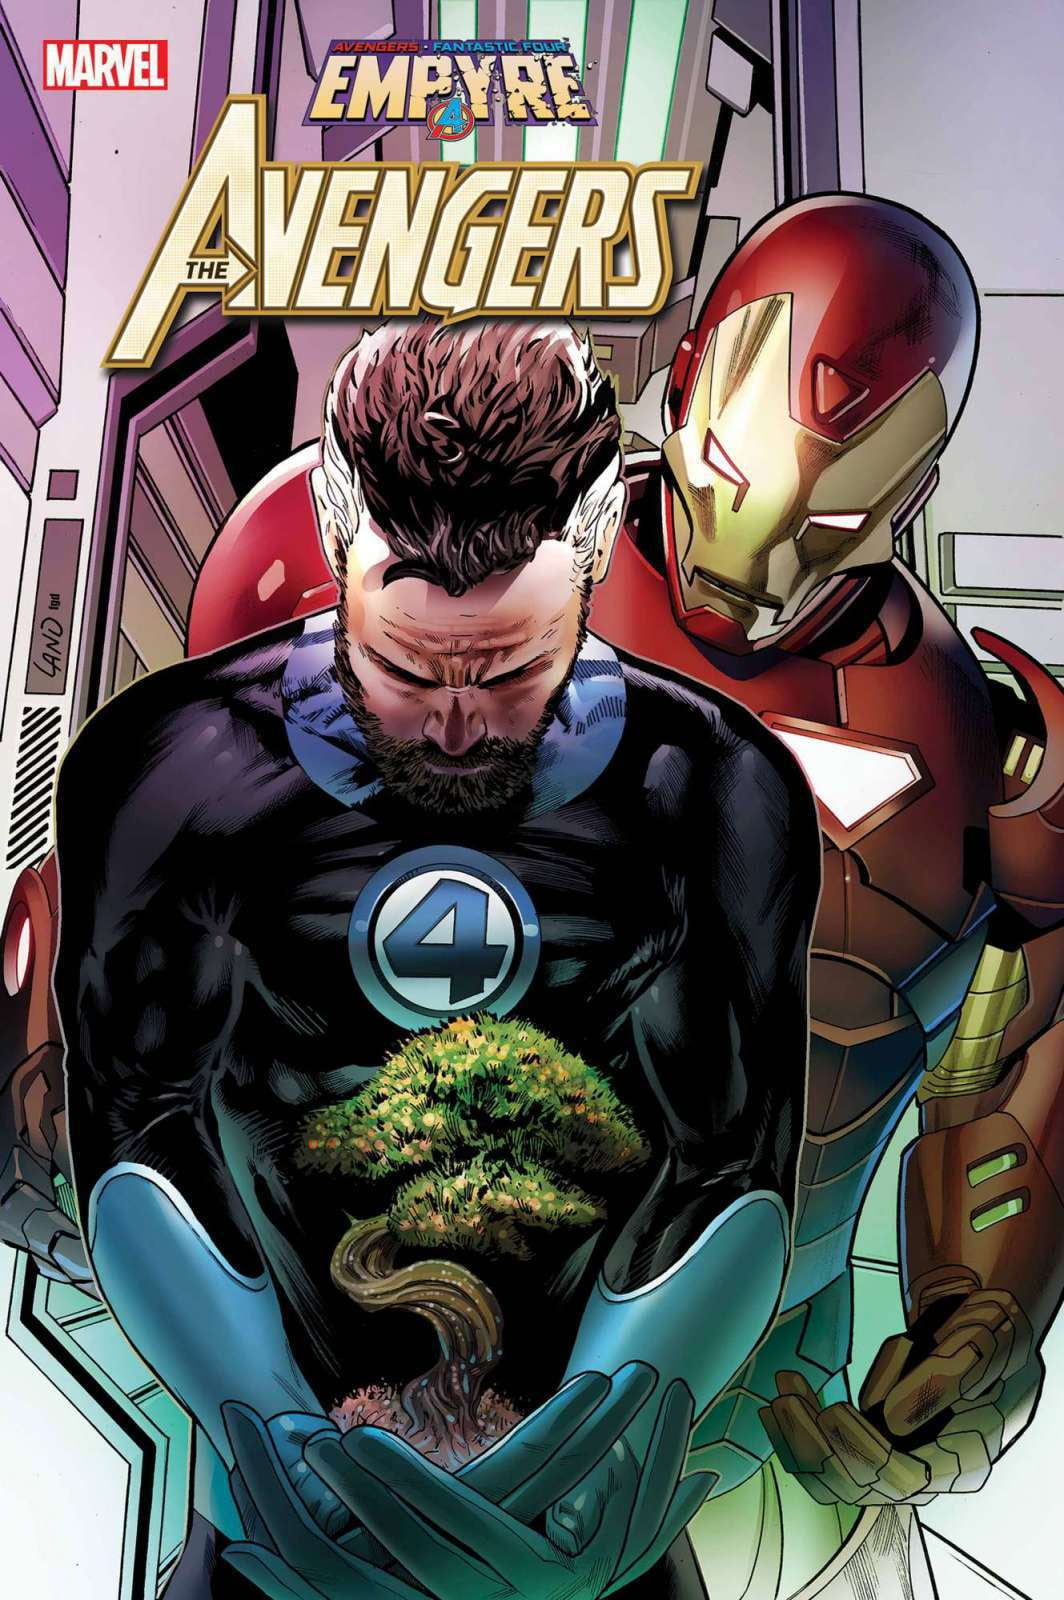 Marvel Comics Empyre #1 Aftermath Avengers (Wedding of Billy Kaplan (Wiccan) and Teddy Altman (Hulkling), Land variant)